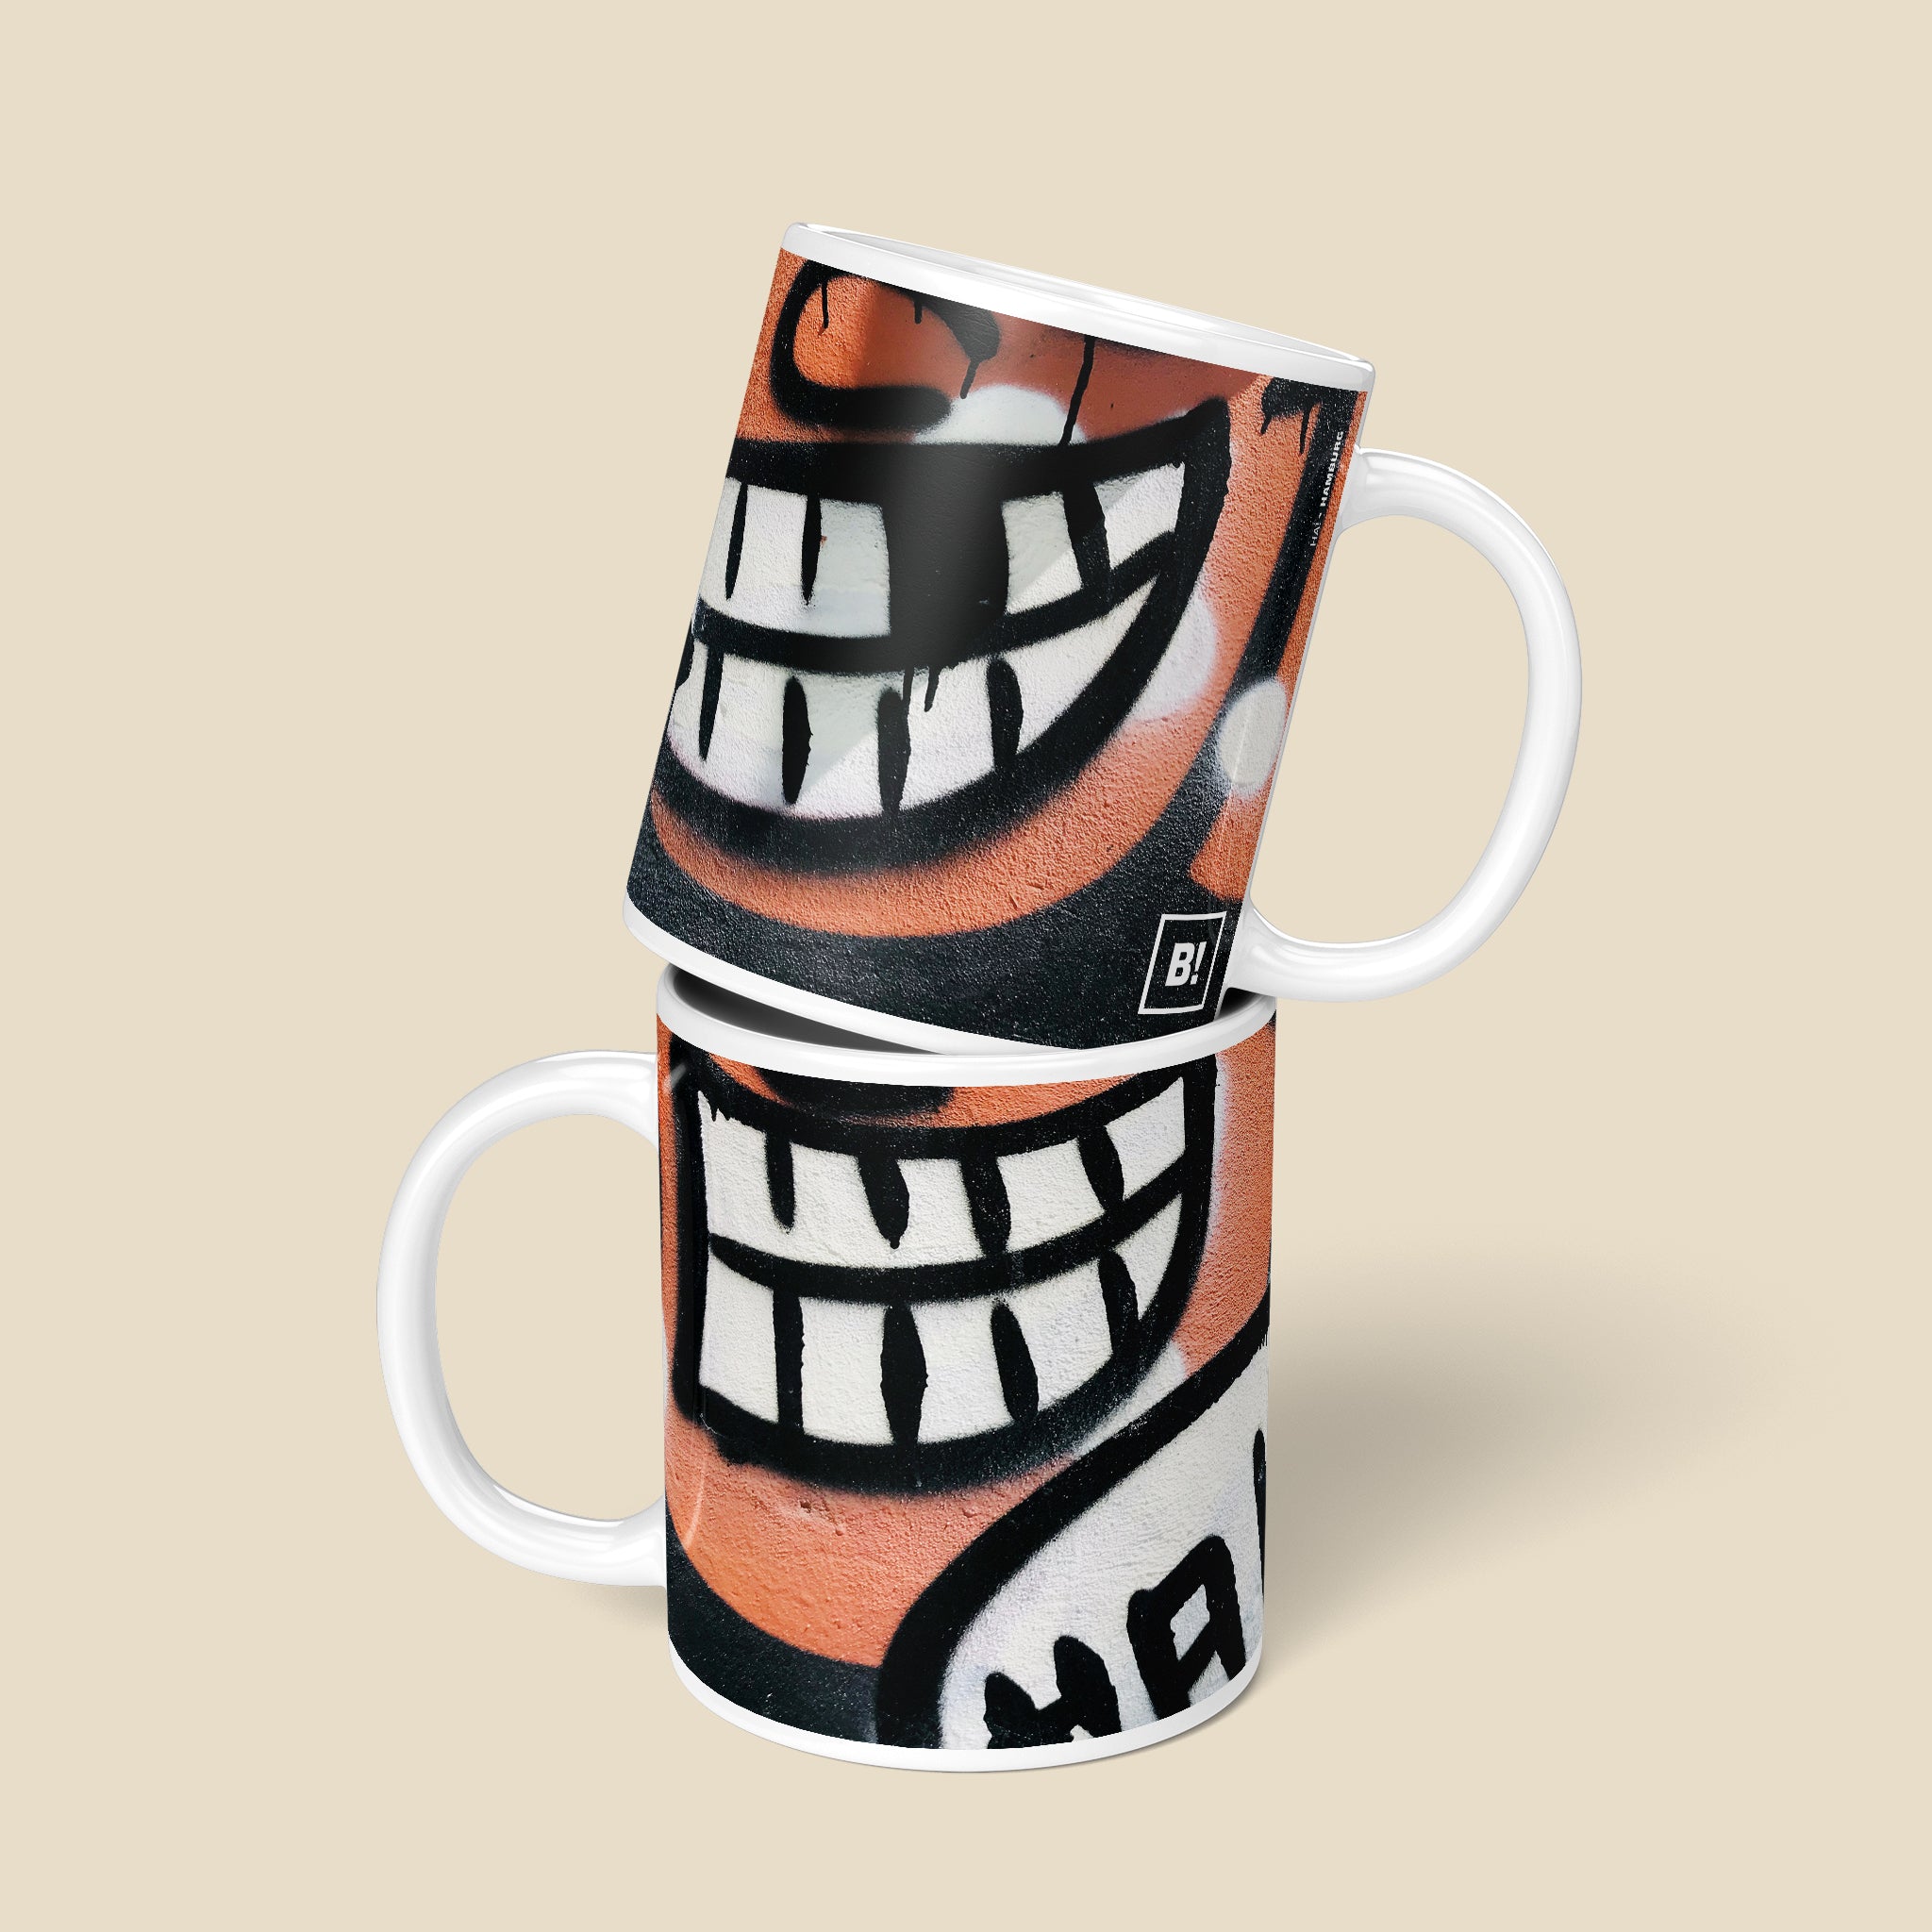 Be inspired by our Urban Art Coffee Mug "HA!" from Hamburg. This mug features an 11oz size with a front and back view.